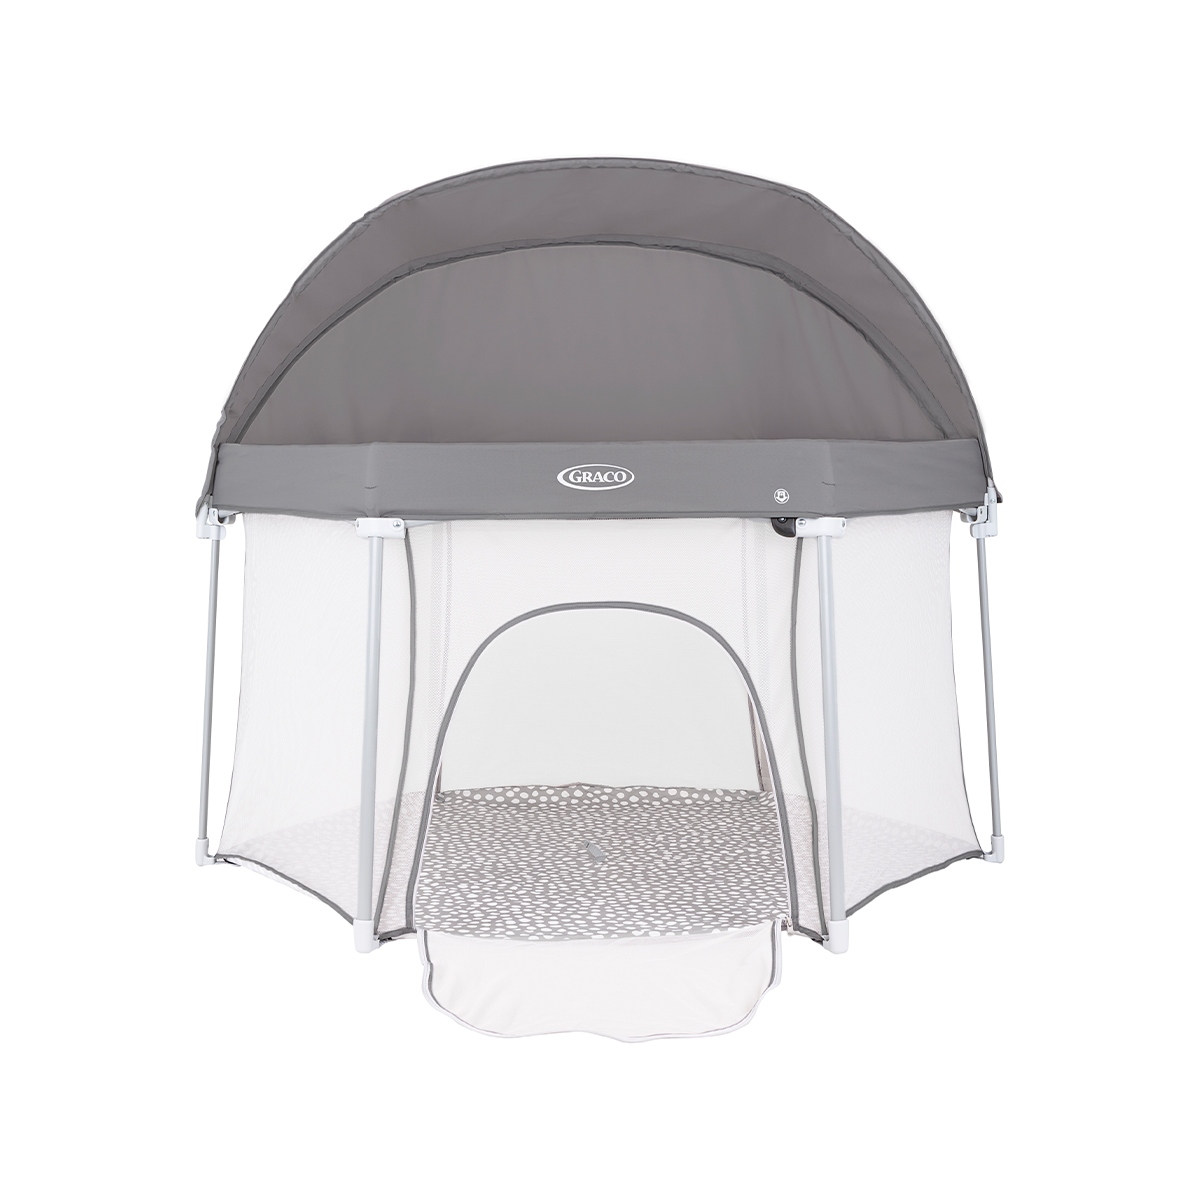 Graco EverGo playpen with canopy front angle on white background.